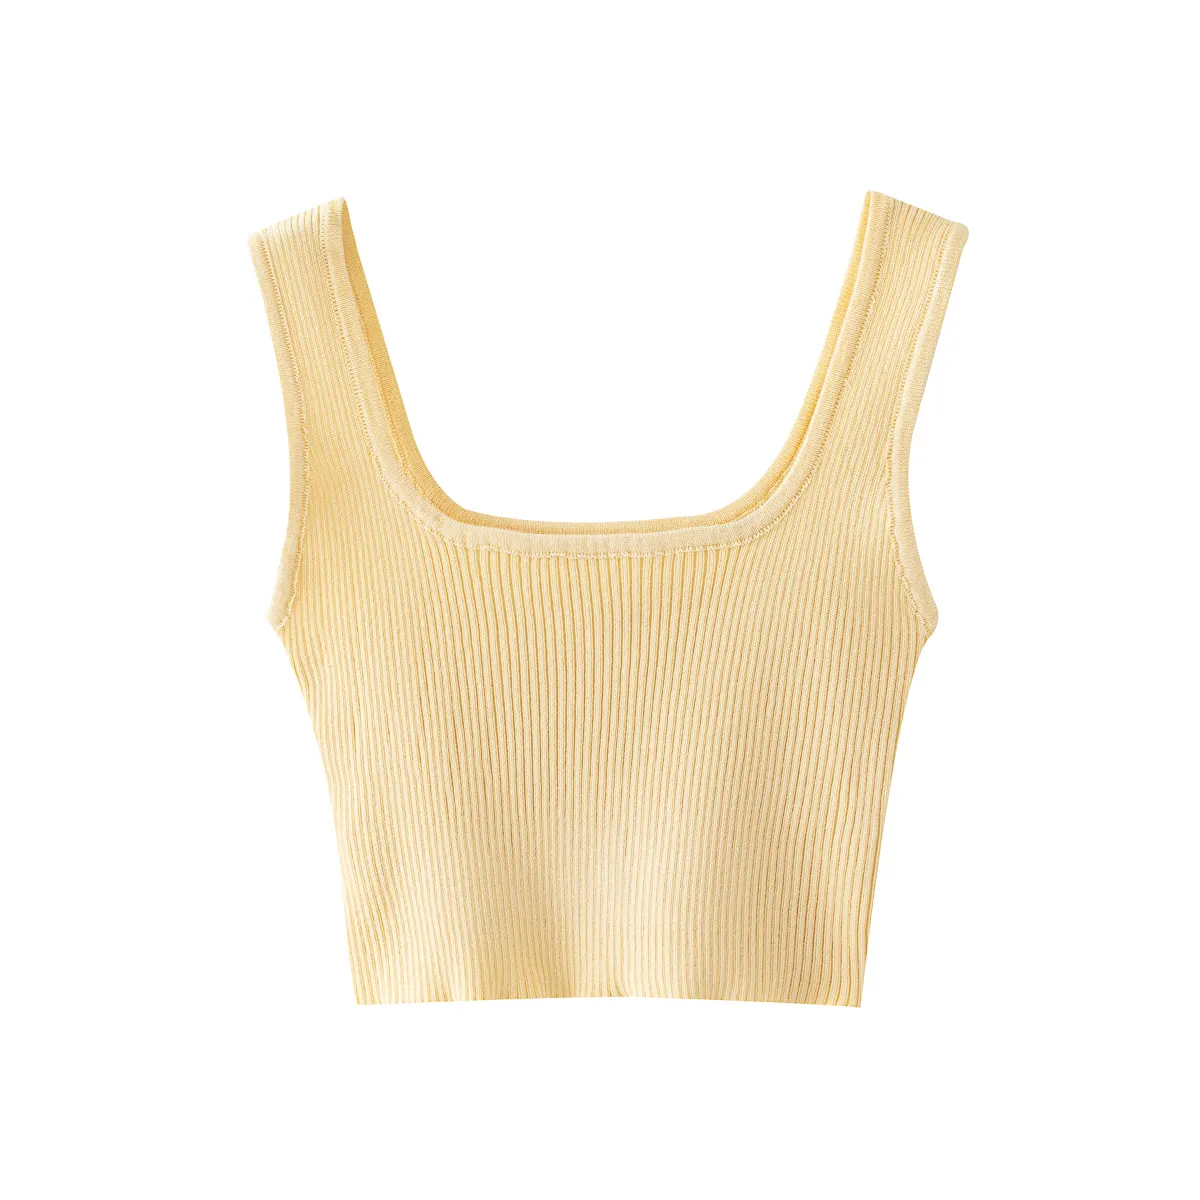 S3154C good quality Y2K women casual tops Yellow knitted elastic tank tops women summer sexy knit crop top